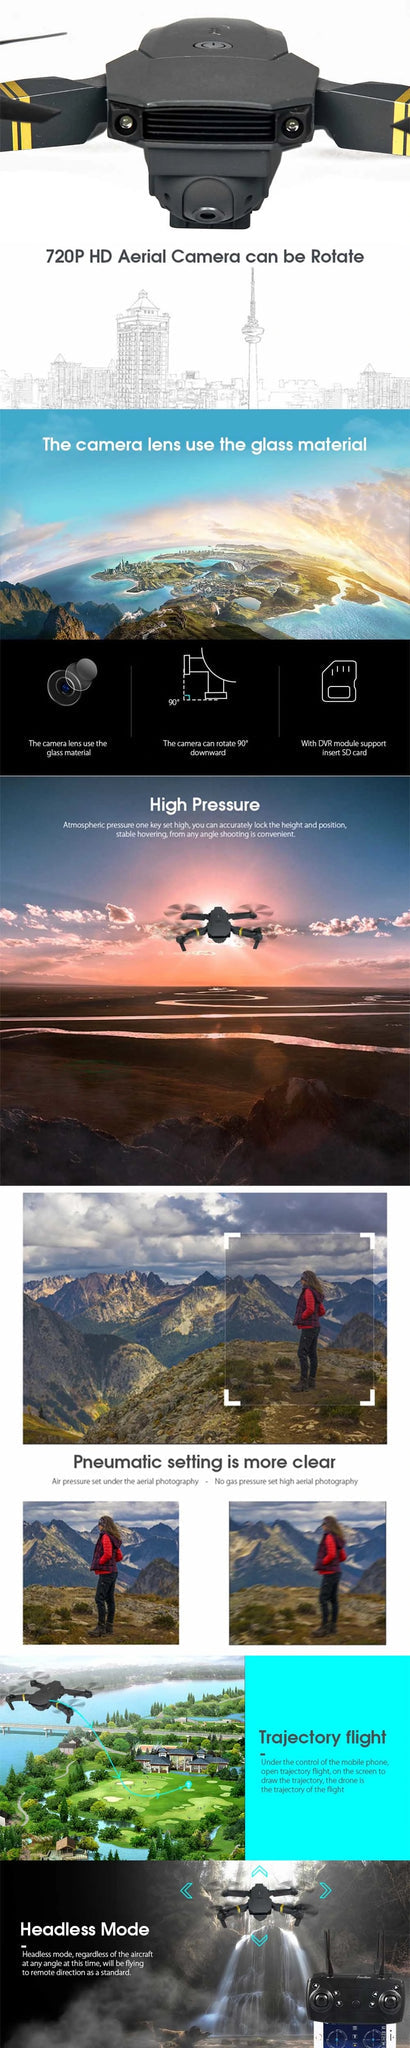 E58 Drone, aerial camera can be rotate the camera lens use the glass material .